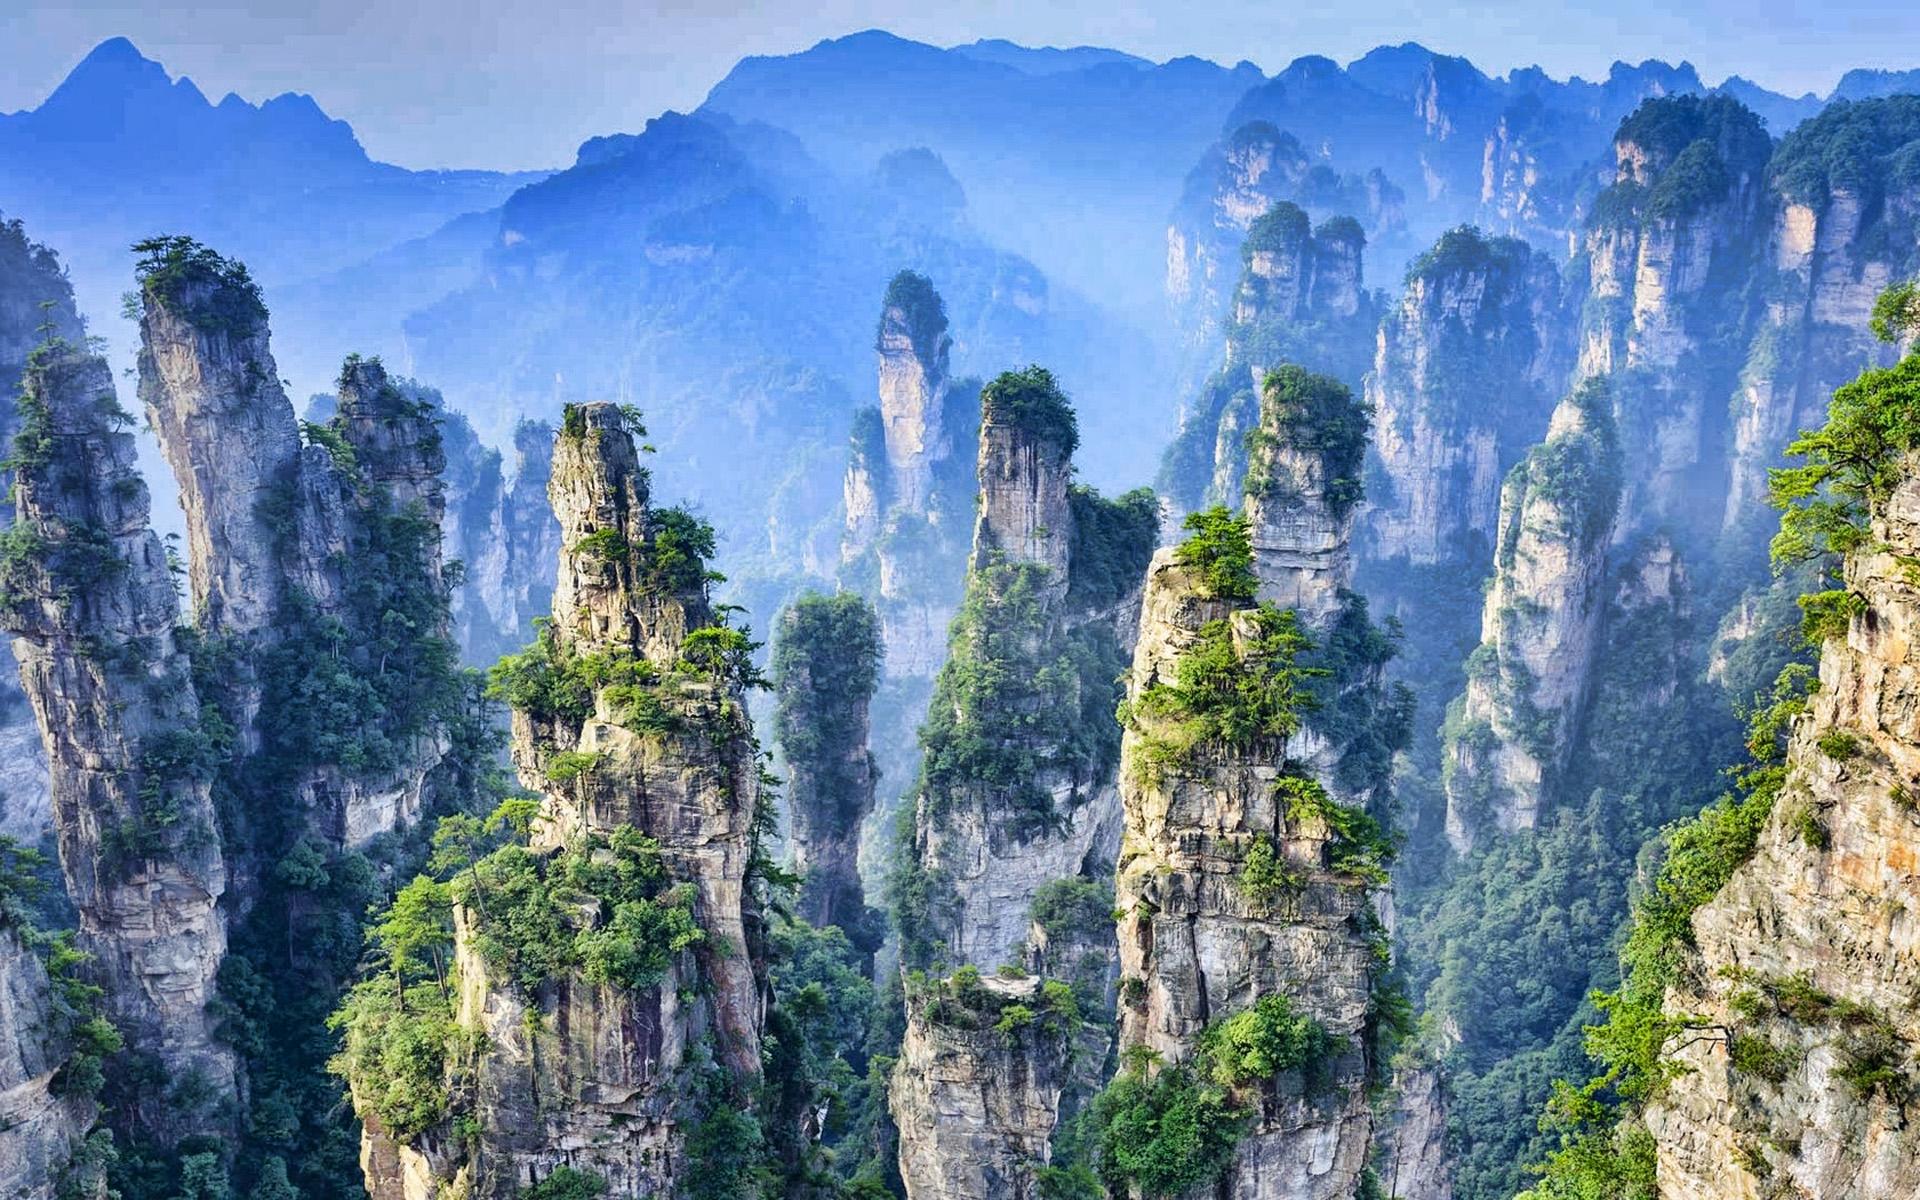 Download wallpaper Zhangjiajie National Forest Park, rocks, summer, fog, chinese landmarks, Zhangjiajie, Asia, China, HDR for desktop with resolution 1920x1200. High Quality HD picture wallpaper